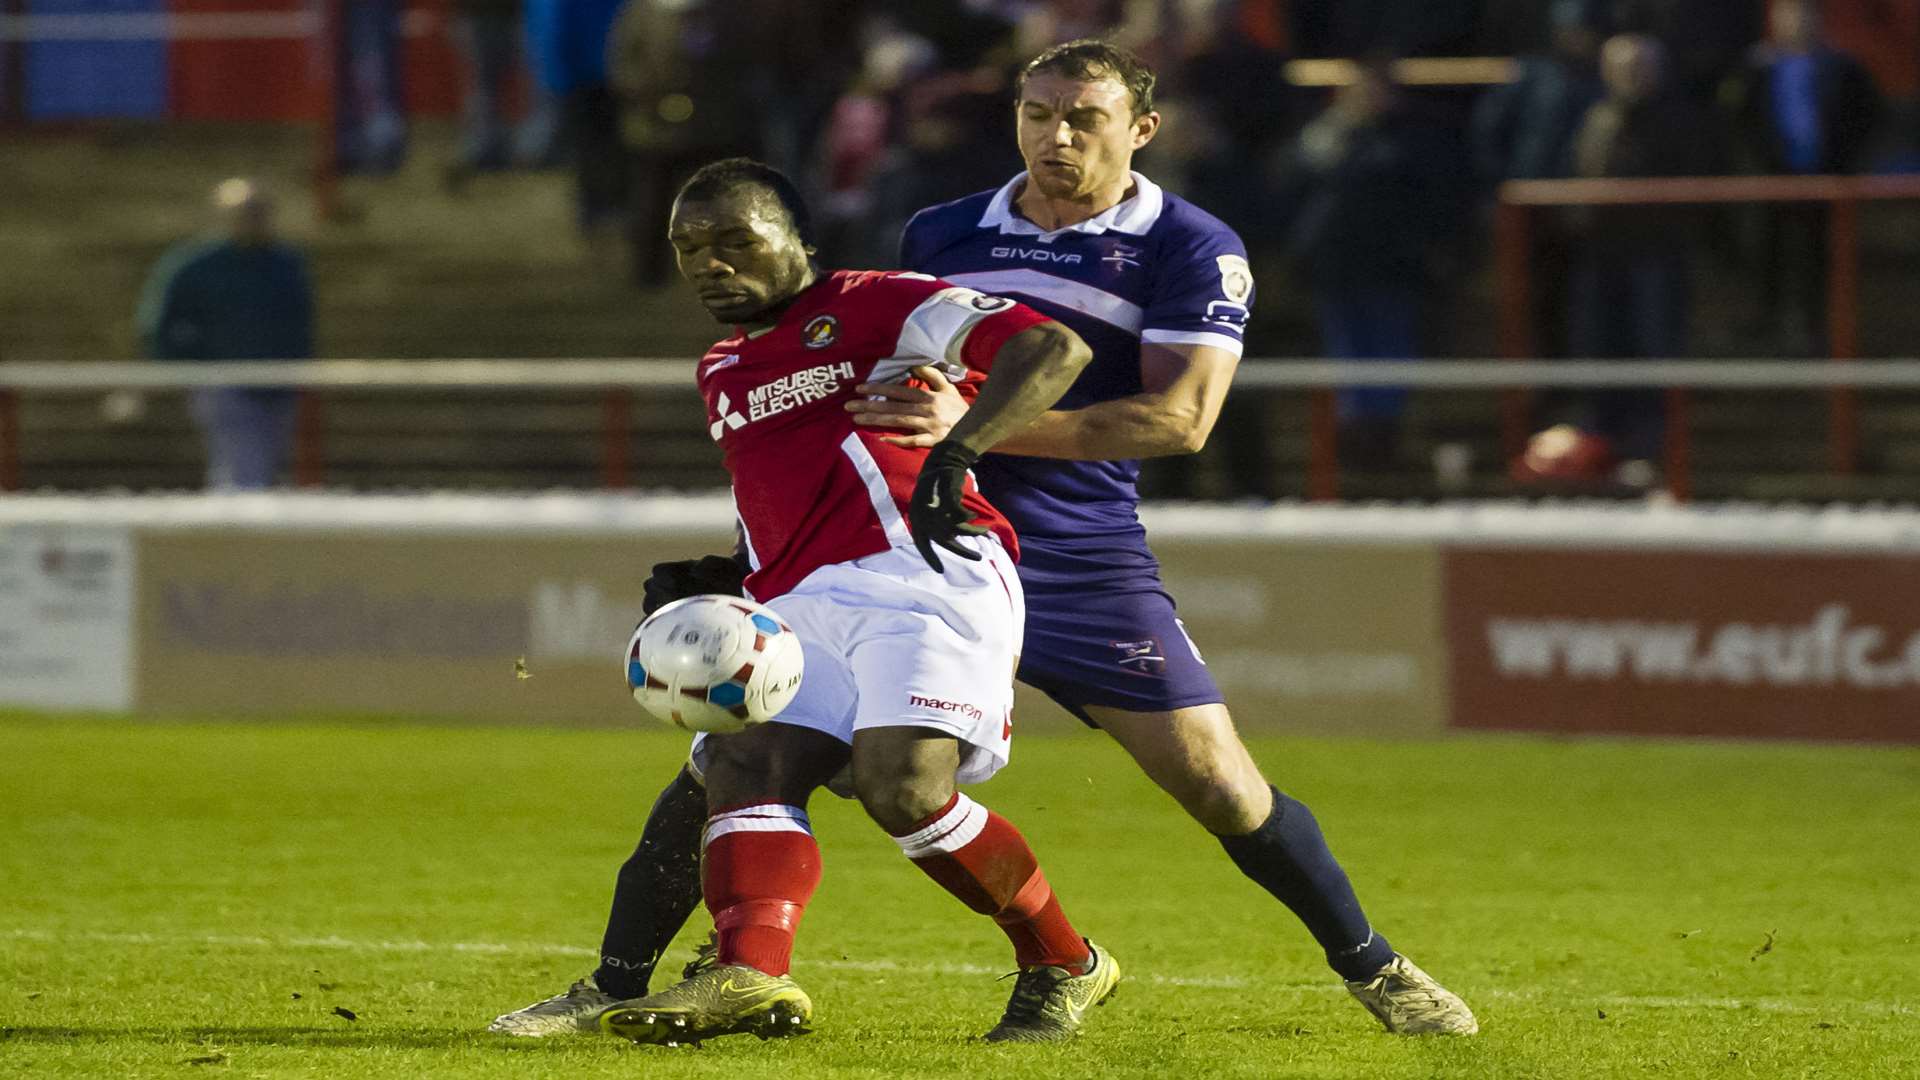 Aaron McLean has scored five goals in his last four games for Ebbsfleet Picture: Andy Payton